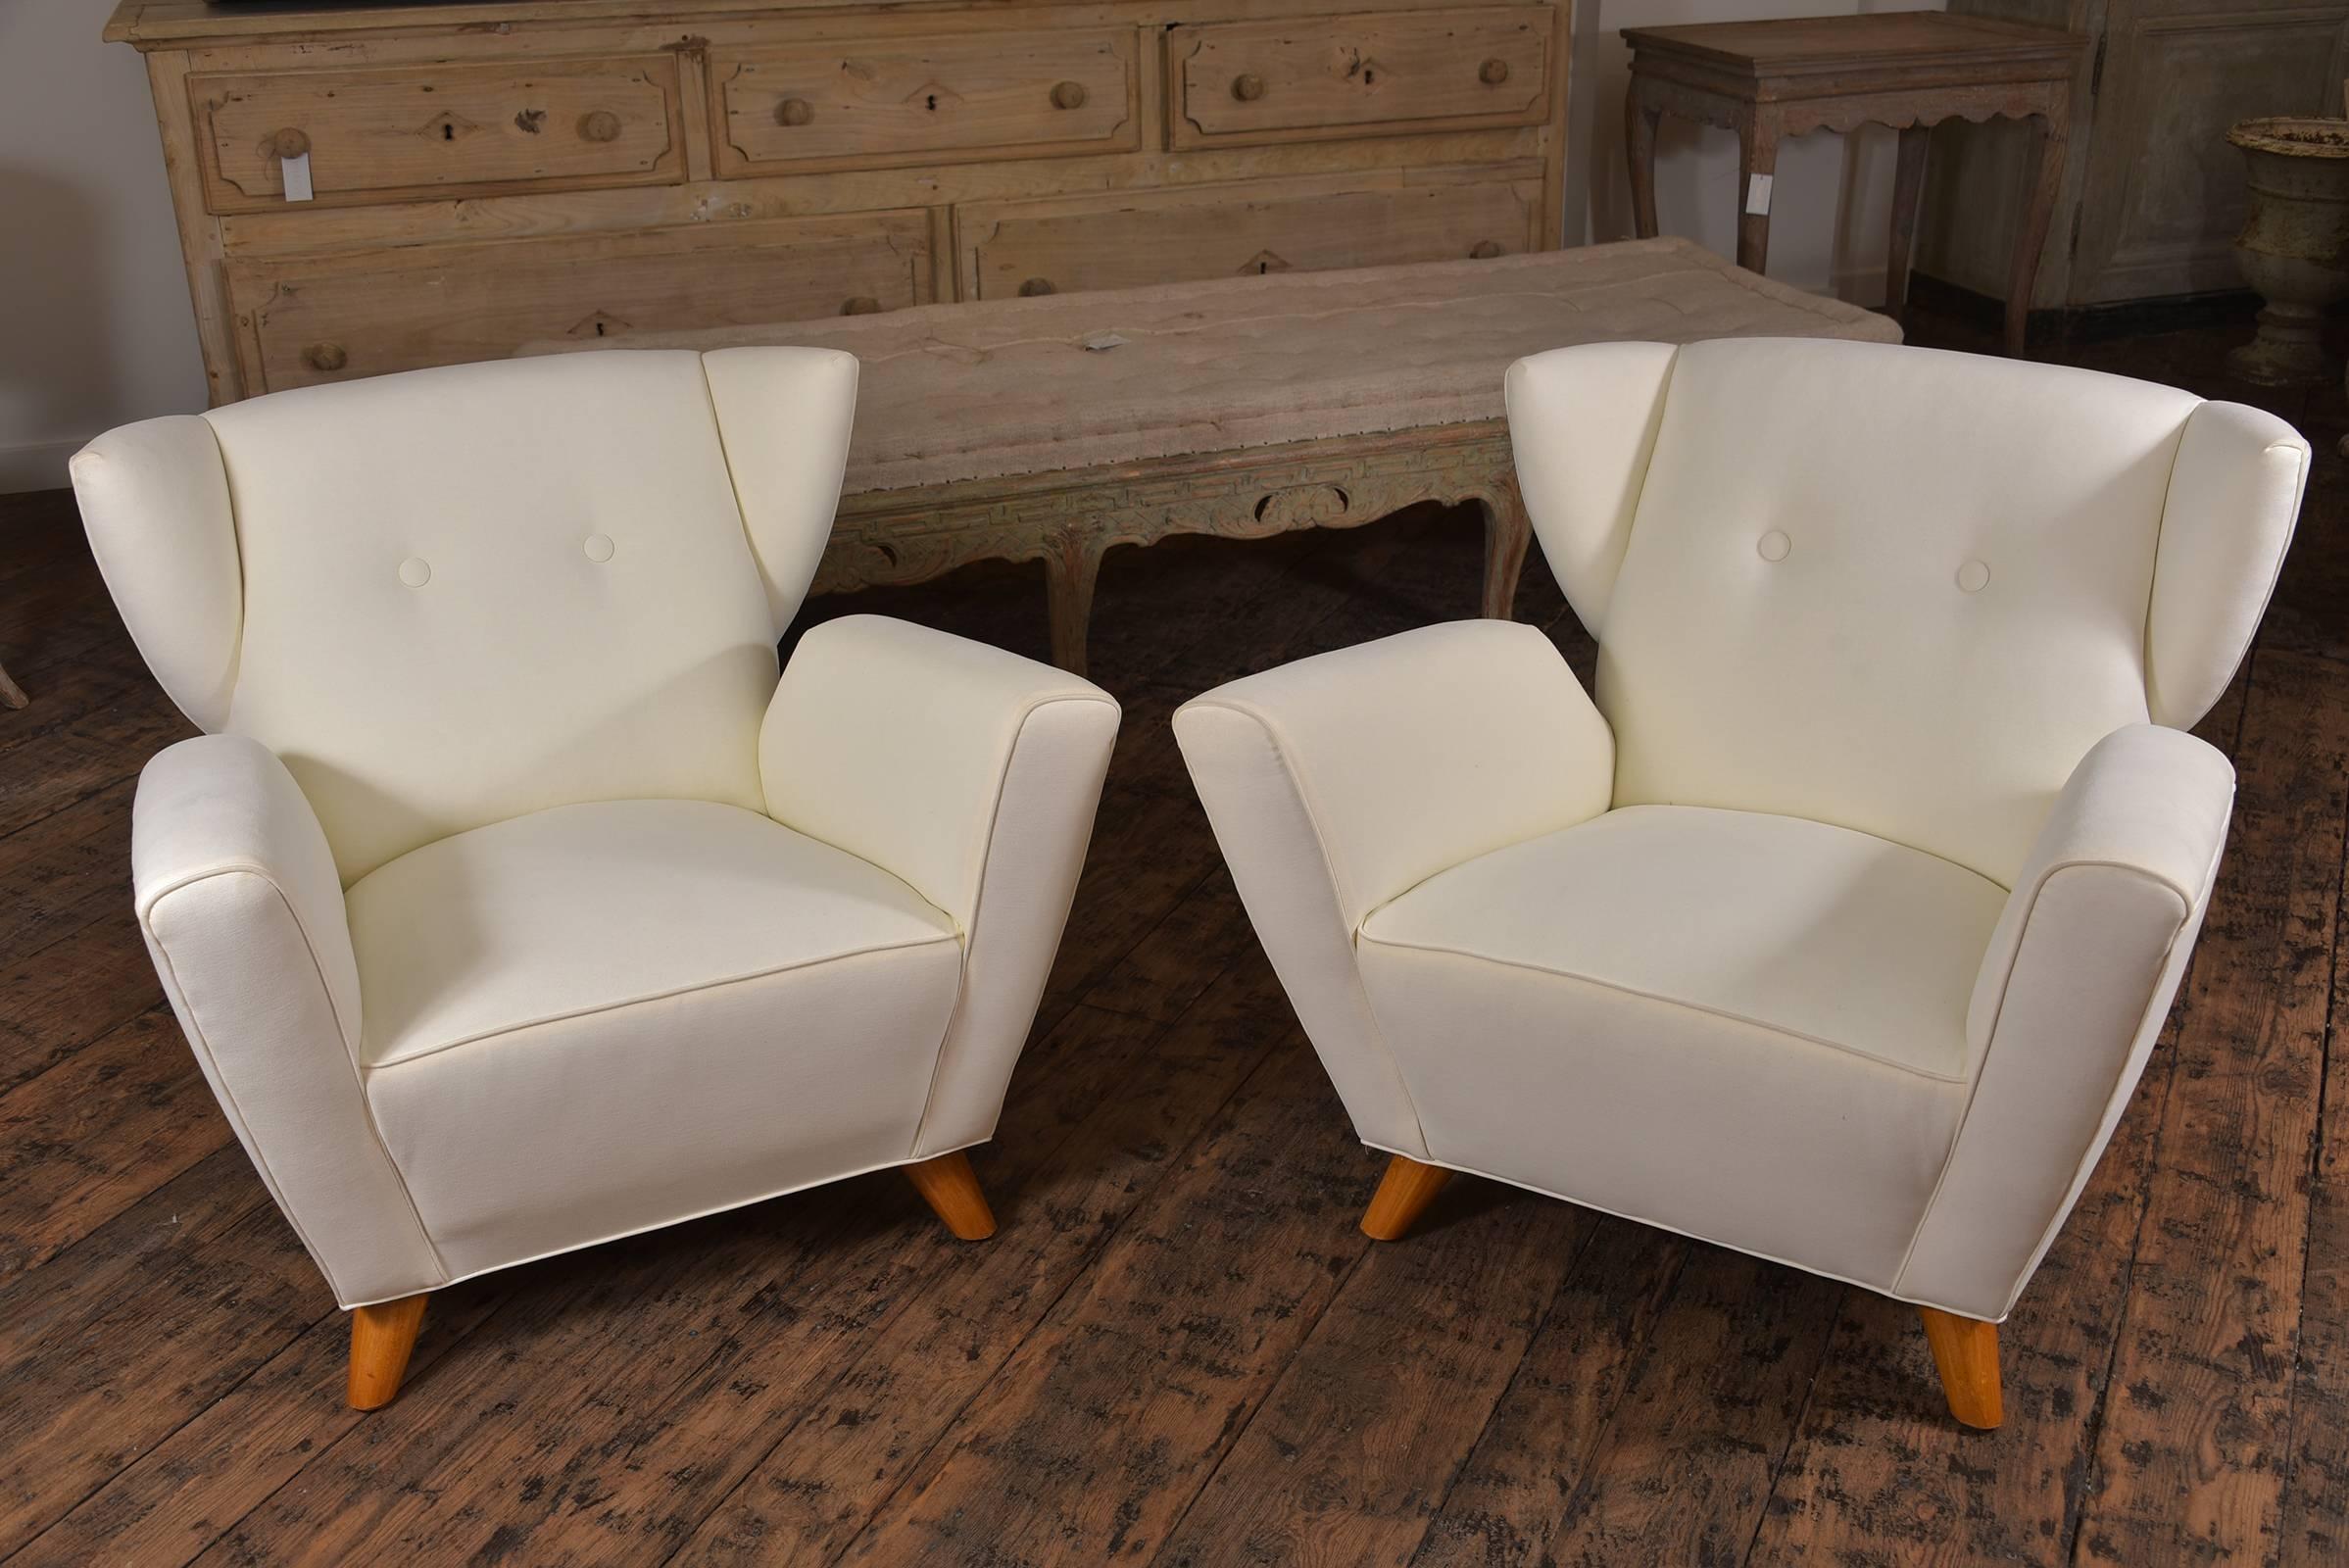 Very unusual pair of Italian wing chairs, circa 1950 made by Umberto Nordio. Complete with new upholstery by Holland and Sherry. A very comfortable pair of chairs.
 